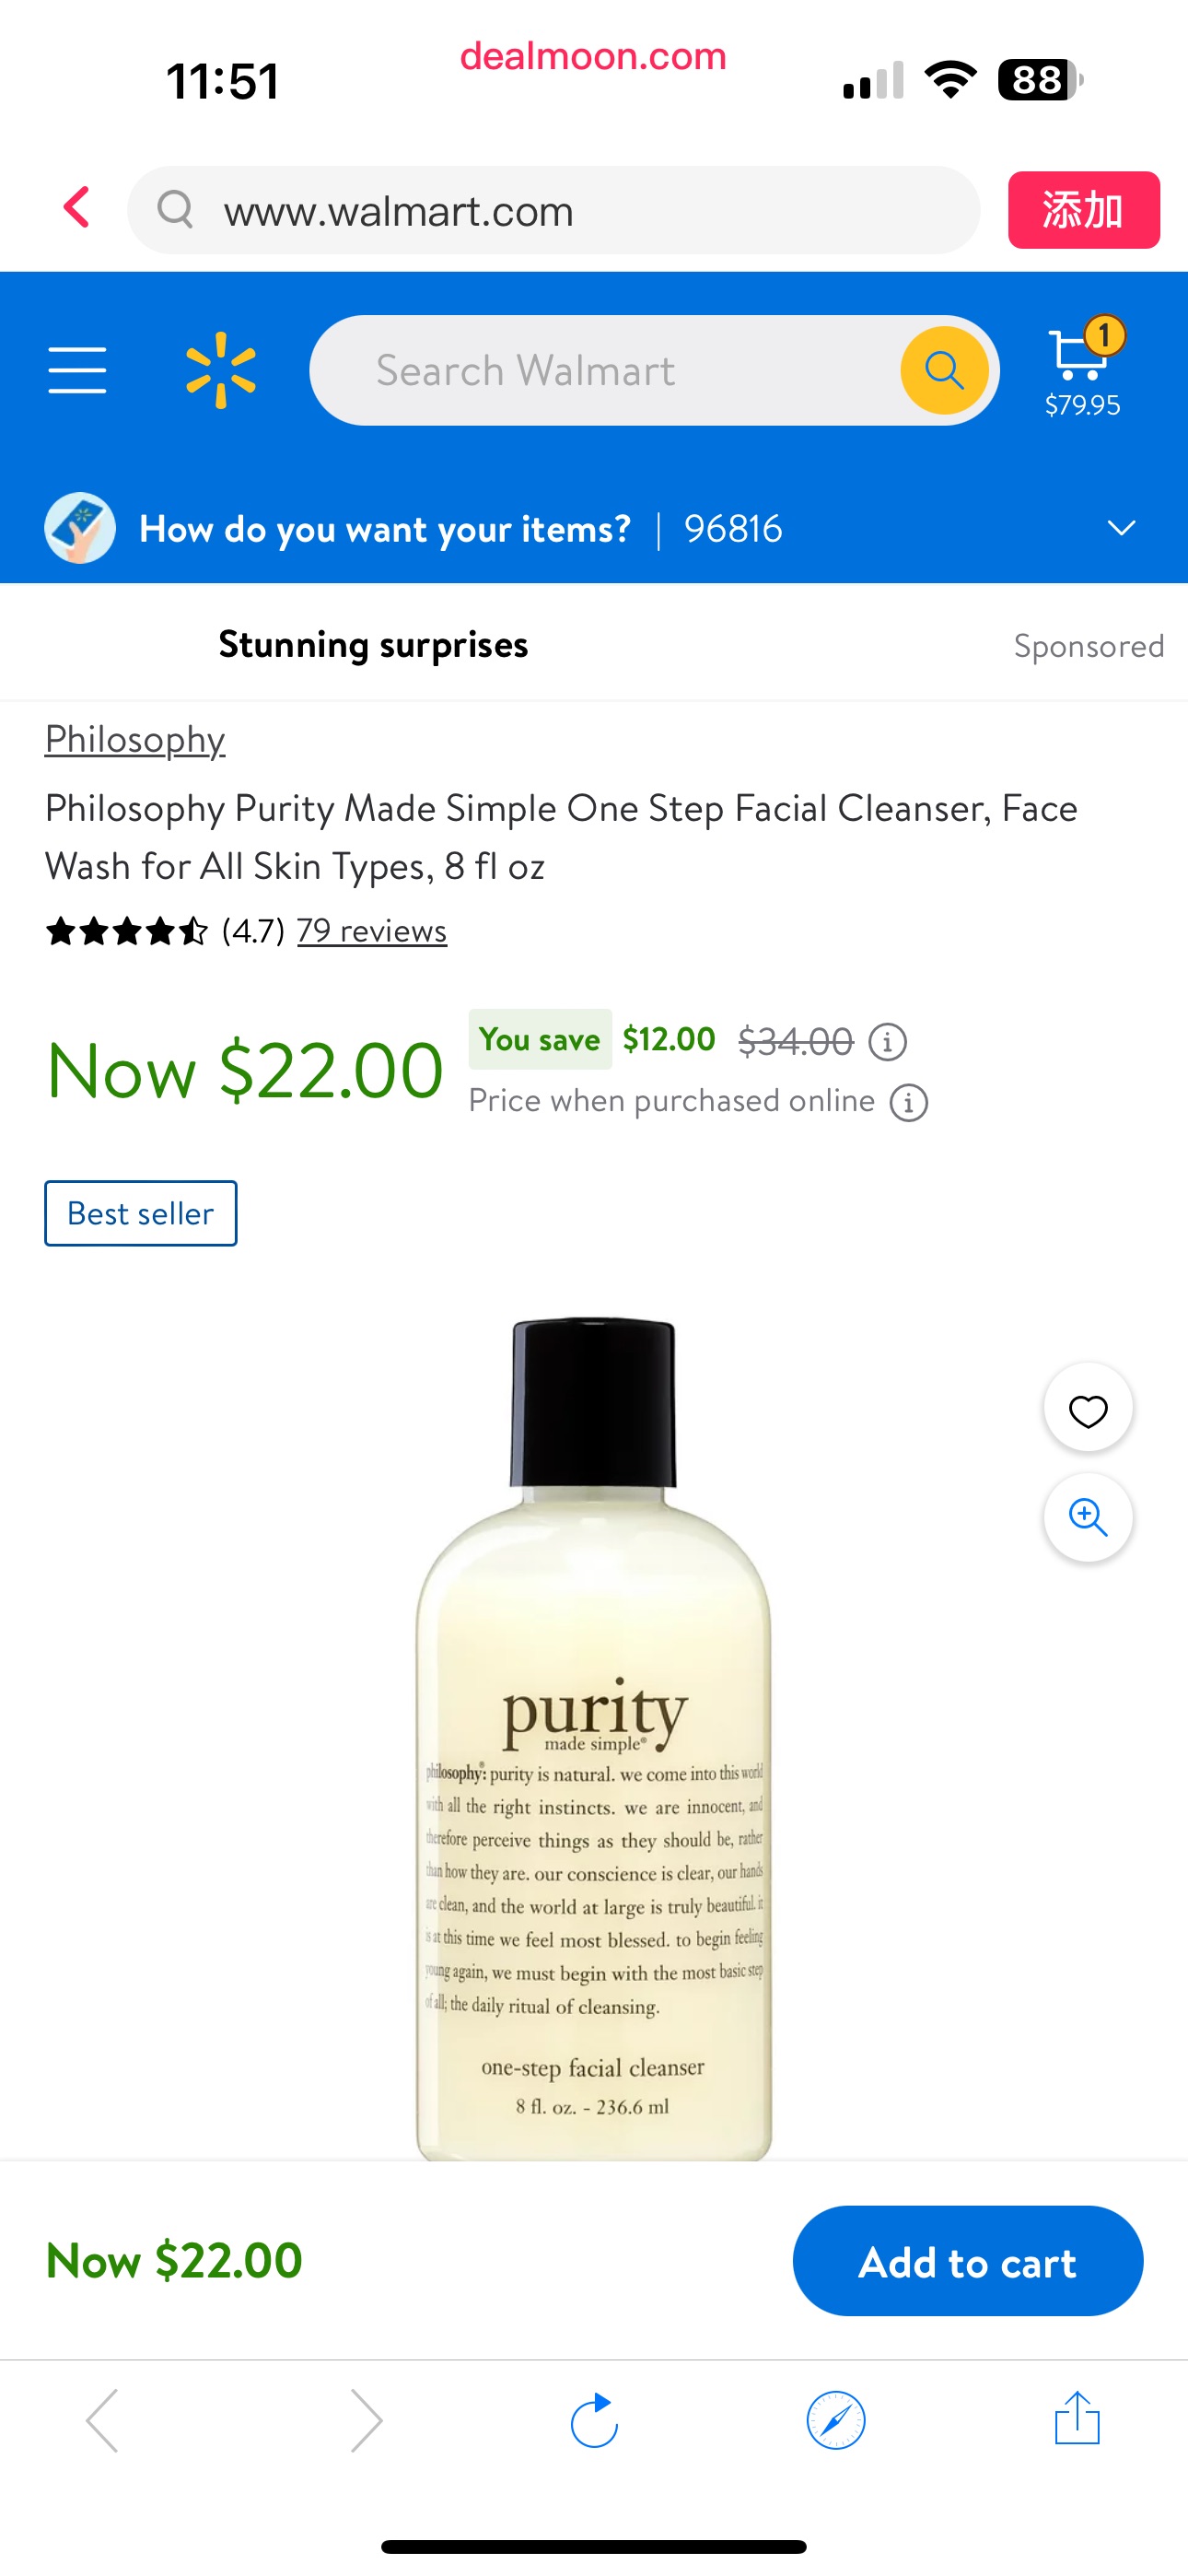 Philosophy Purity Made Simple One Step Facial Cleanser, Face Wash for All Skin Types, 8 fl oz - Walmart.com洁面乳